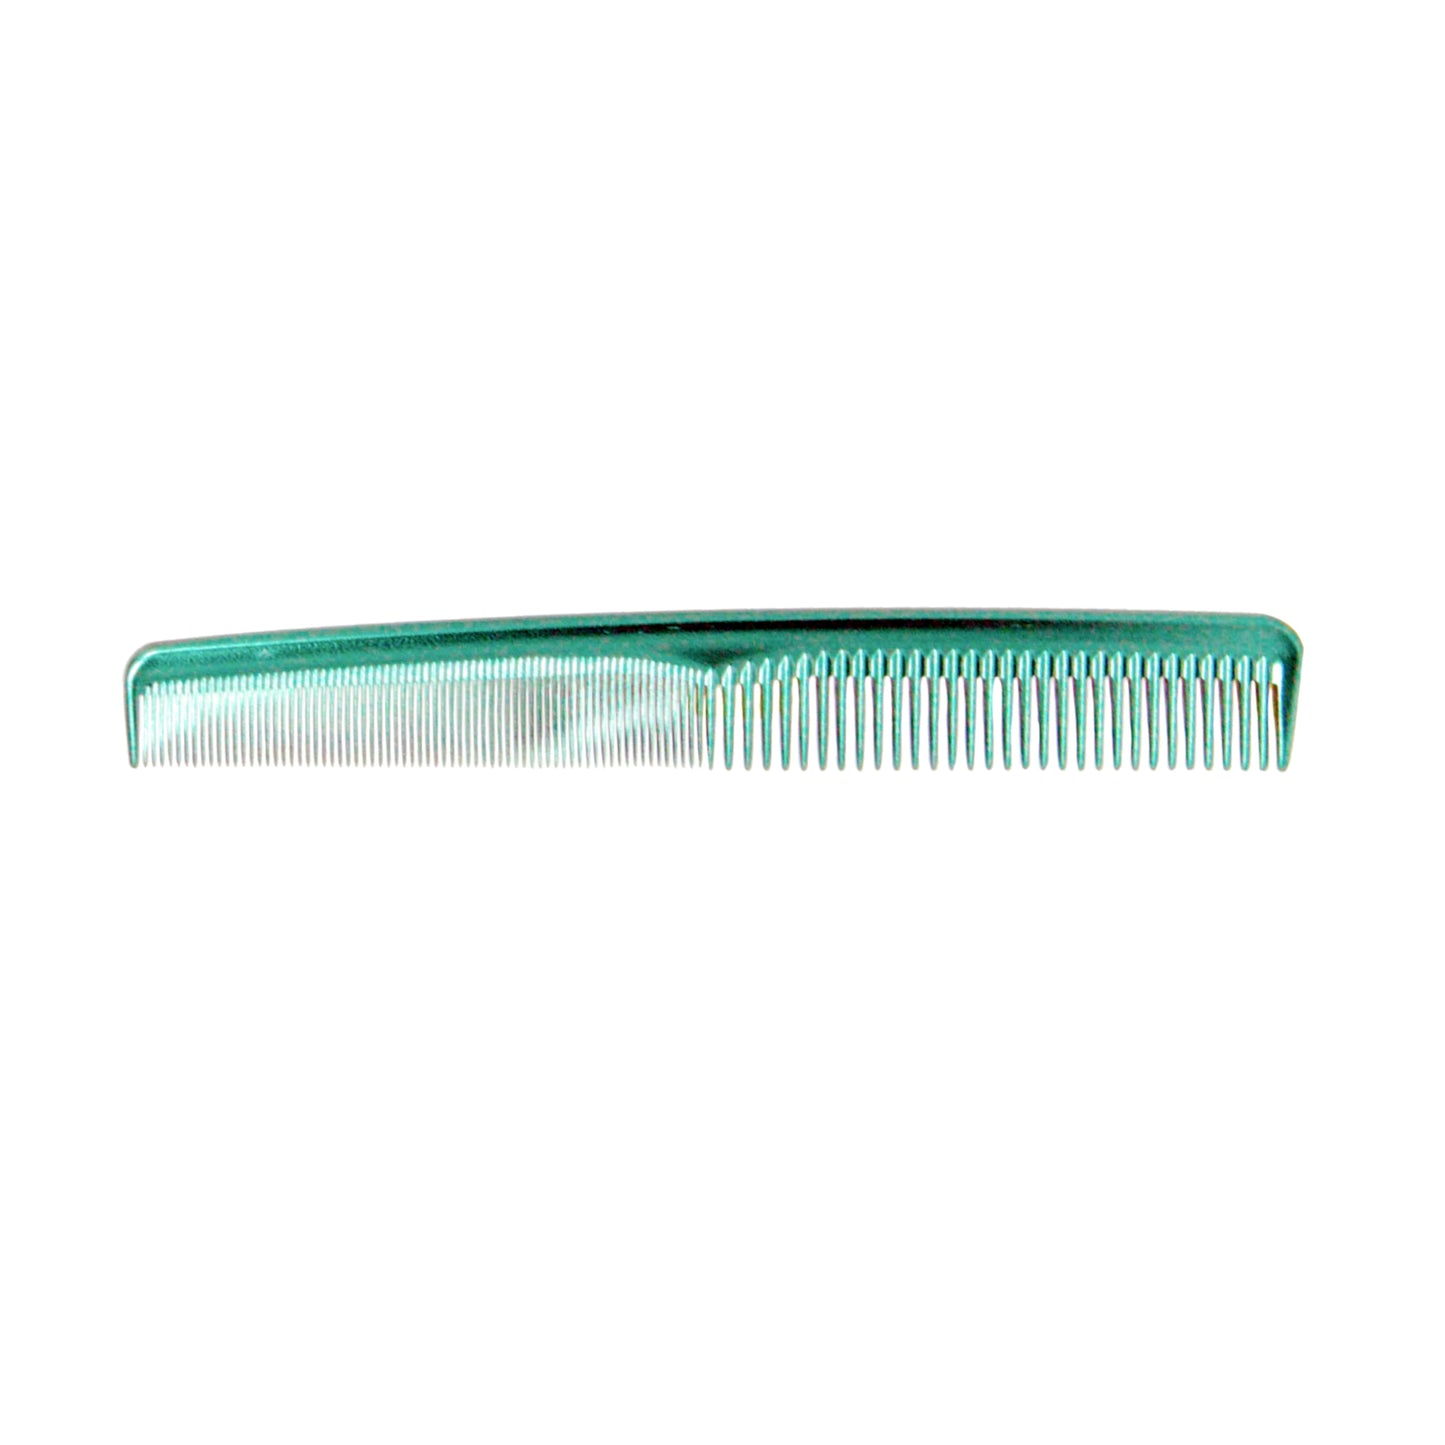 Pegasus MICOLOR 201, 7in Hard Rubber Hair Detangling/Trimmer Comb, Handmade, Seamless, Smooth Edges, Anti Static, Heat and Chemically Resistant, Wet Hair, Everyday Grooming Comb | Peines de goma dura - Green